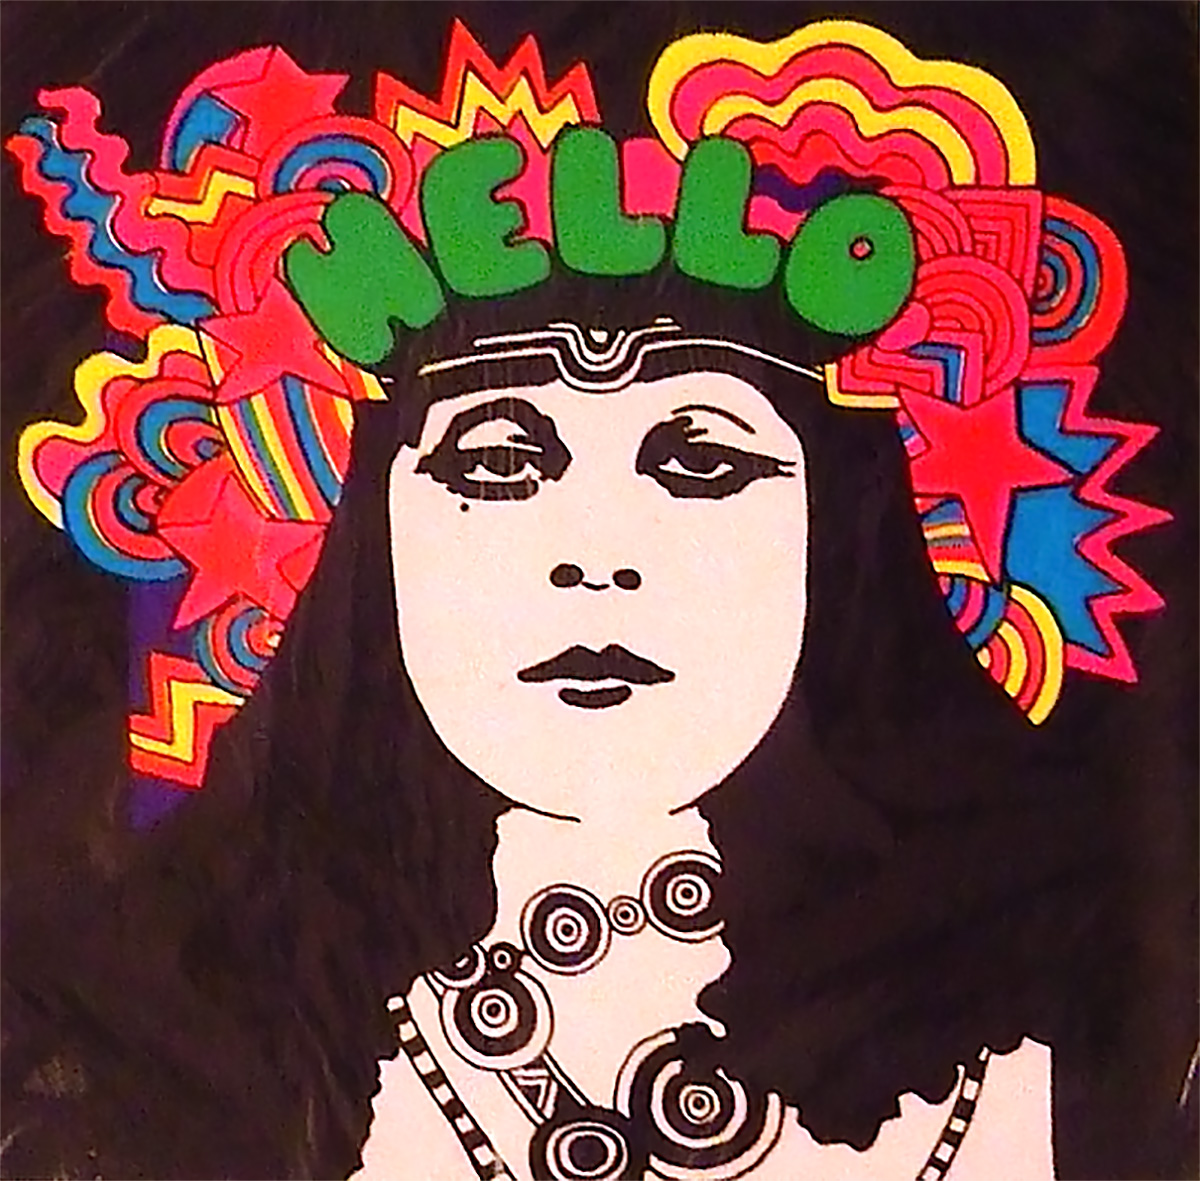 Theda Bara greeting card by Jan Pienkowski for Gallery Five, 1968. 